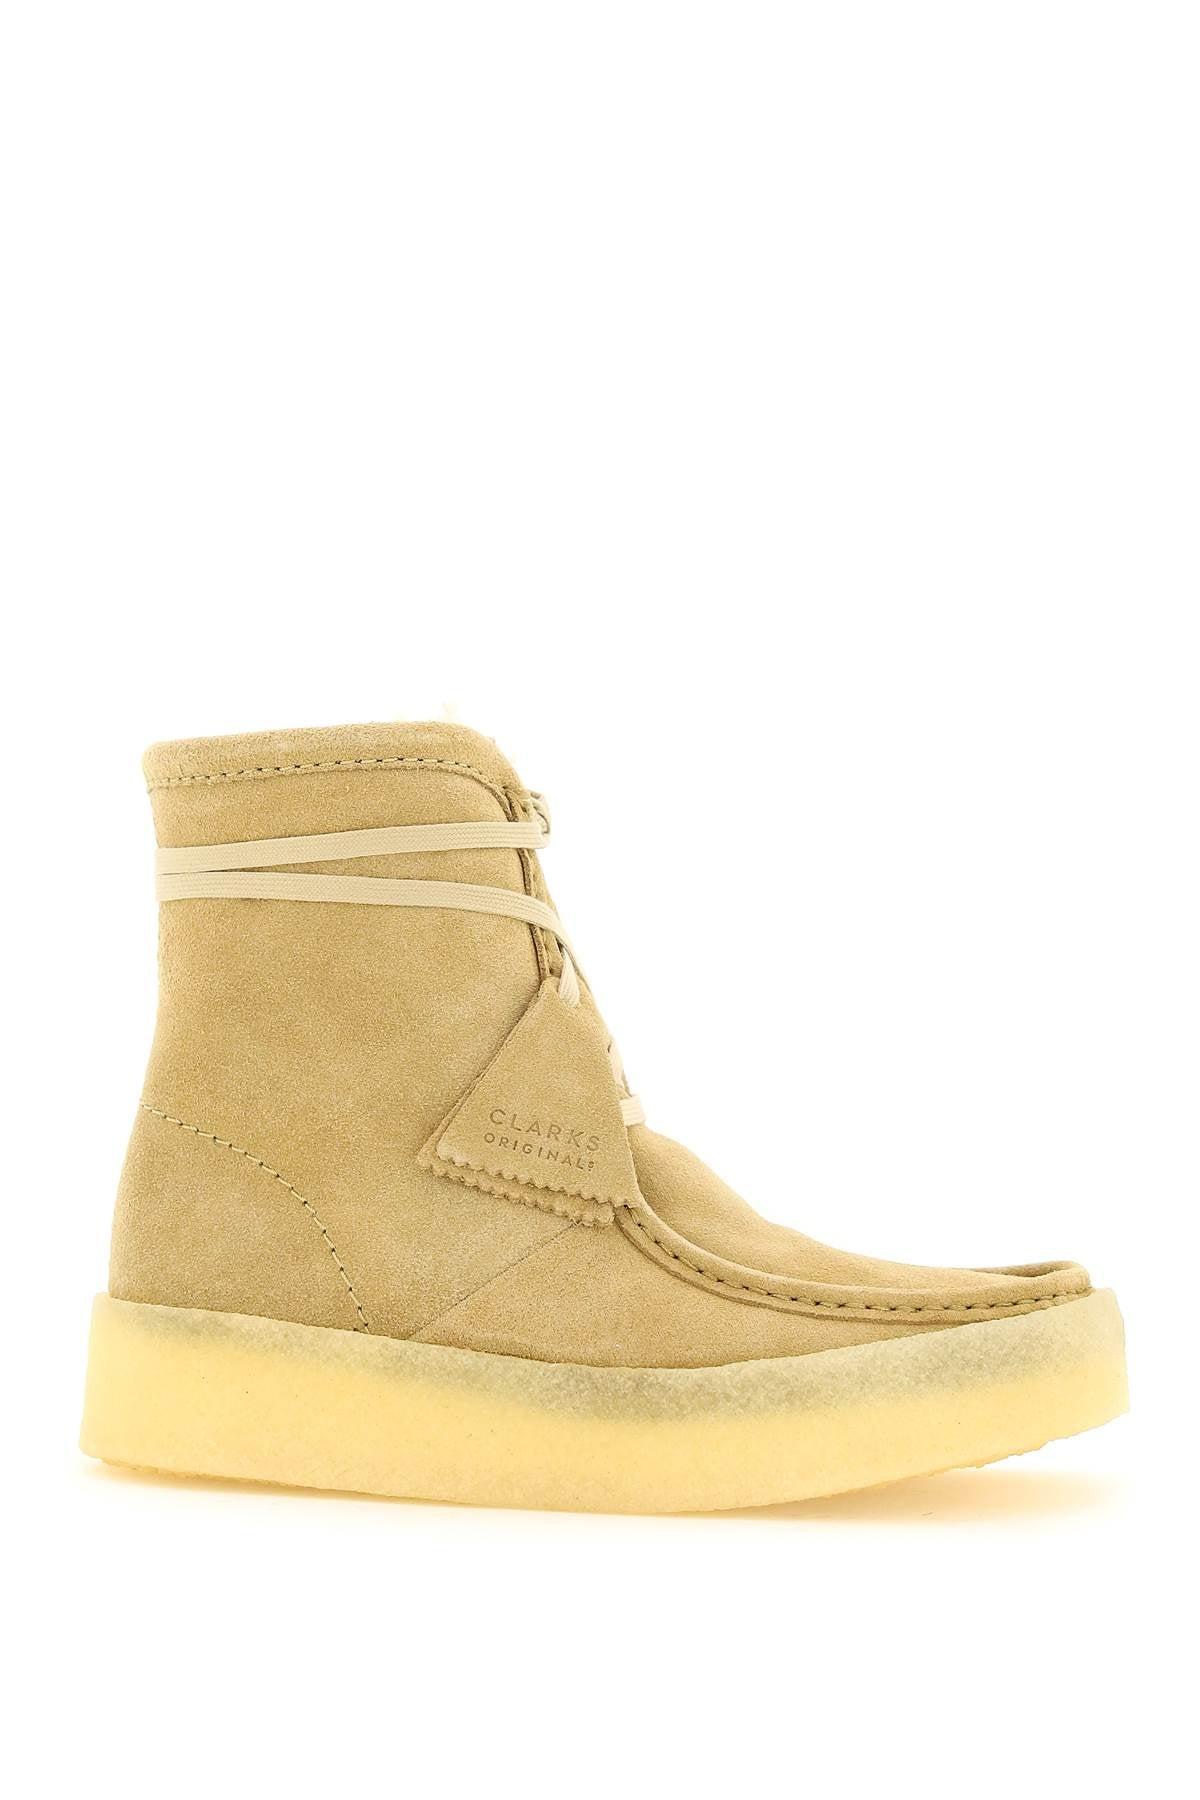 Clarks Suede Wallabee Cup Lace-up Ankle Boots in Beige (Natural) - Save 20%  | Lyst